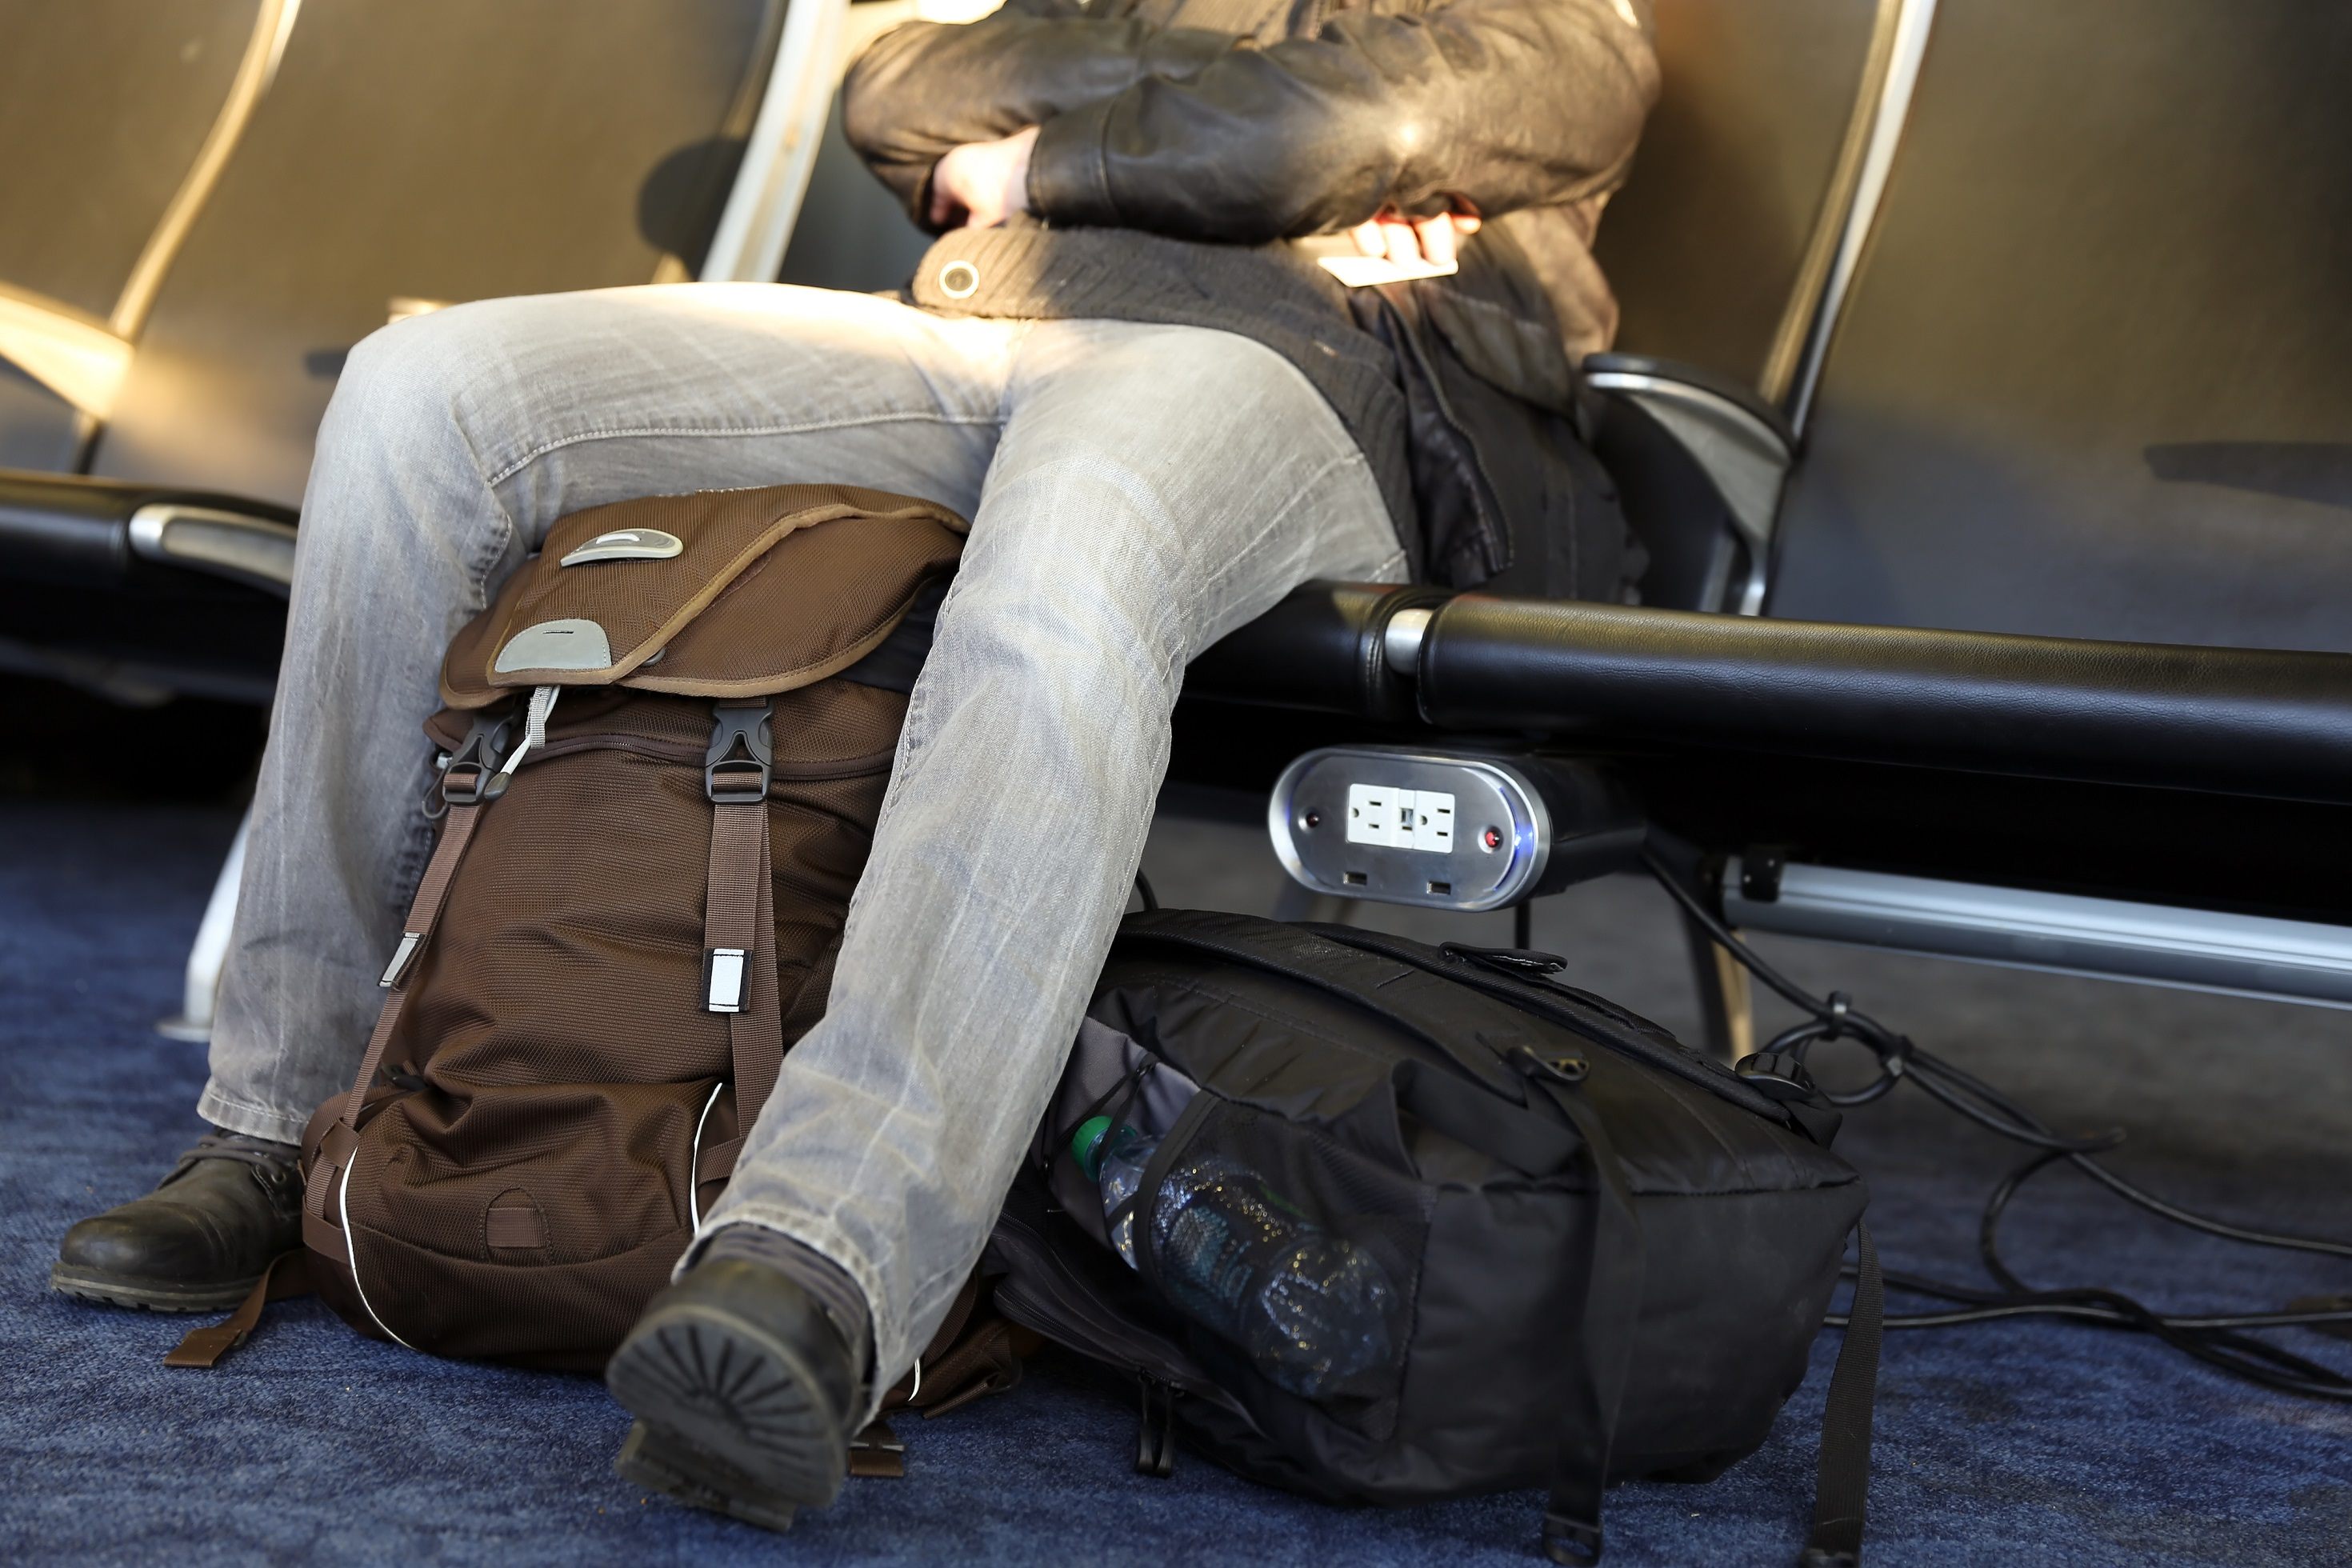 Man sitting in airport with backpacks